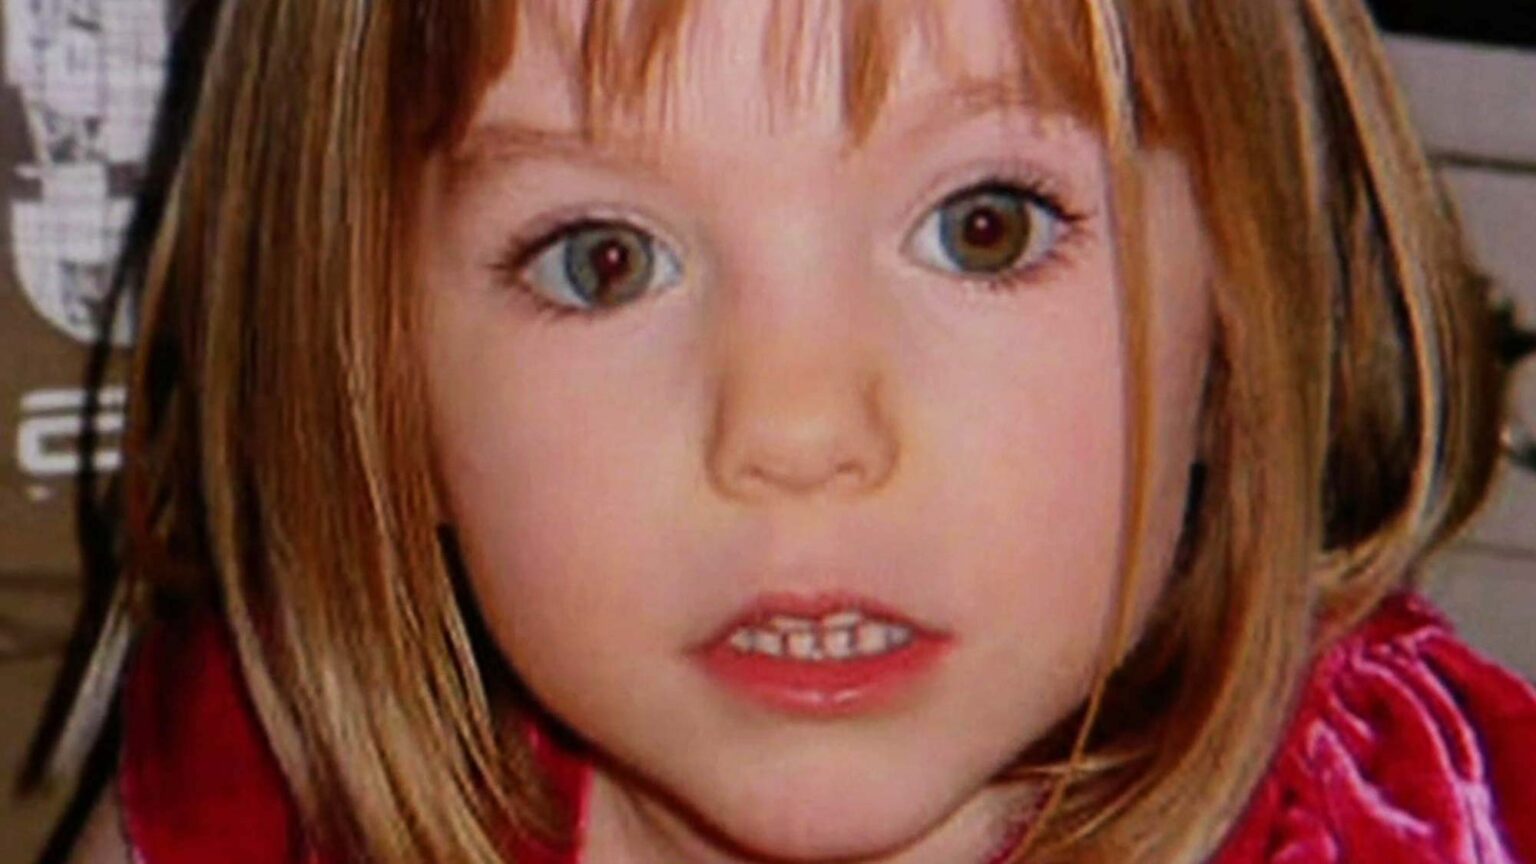 In 2007, 3-year-old Madeleine McCann suddenly vanished from her bed. Can Madeleine be found? This new suspect may lead us to the missing child. Here's how.